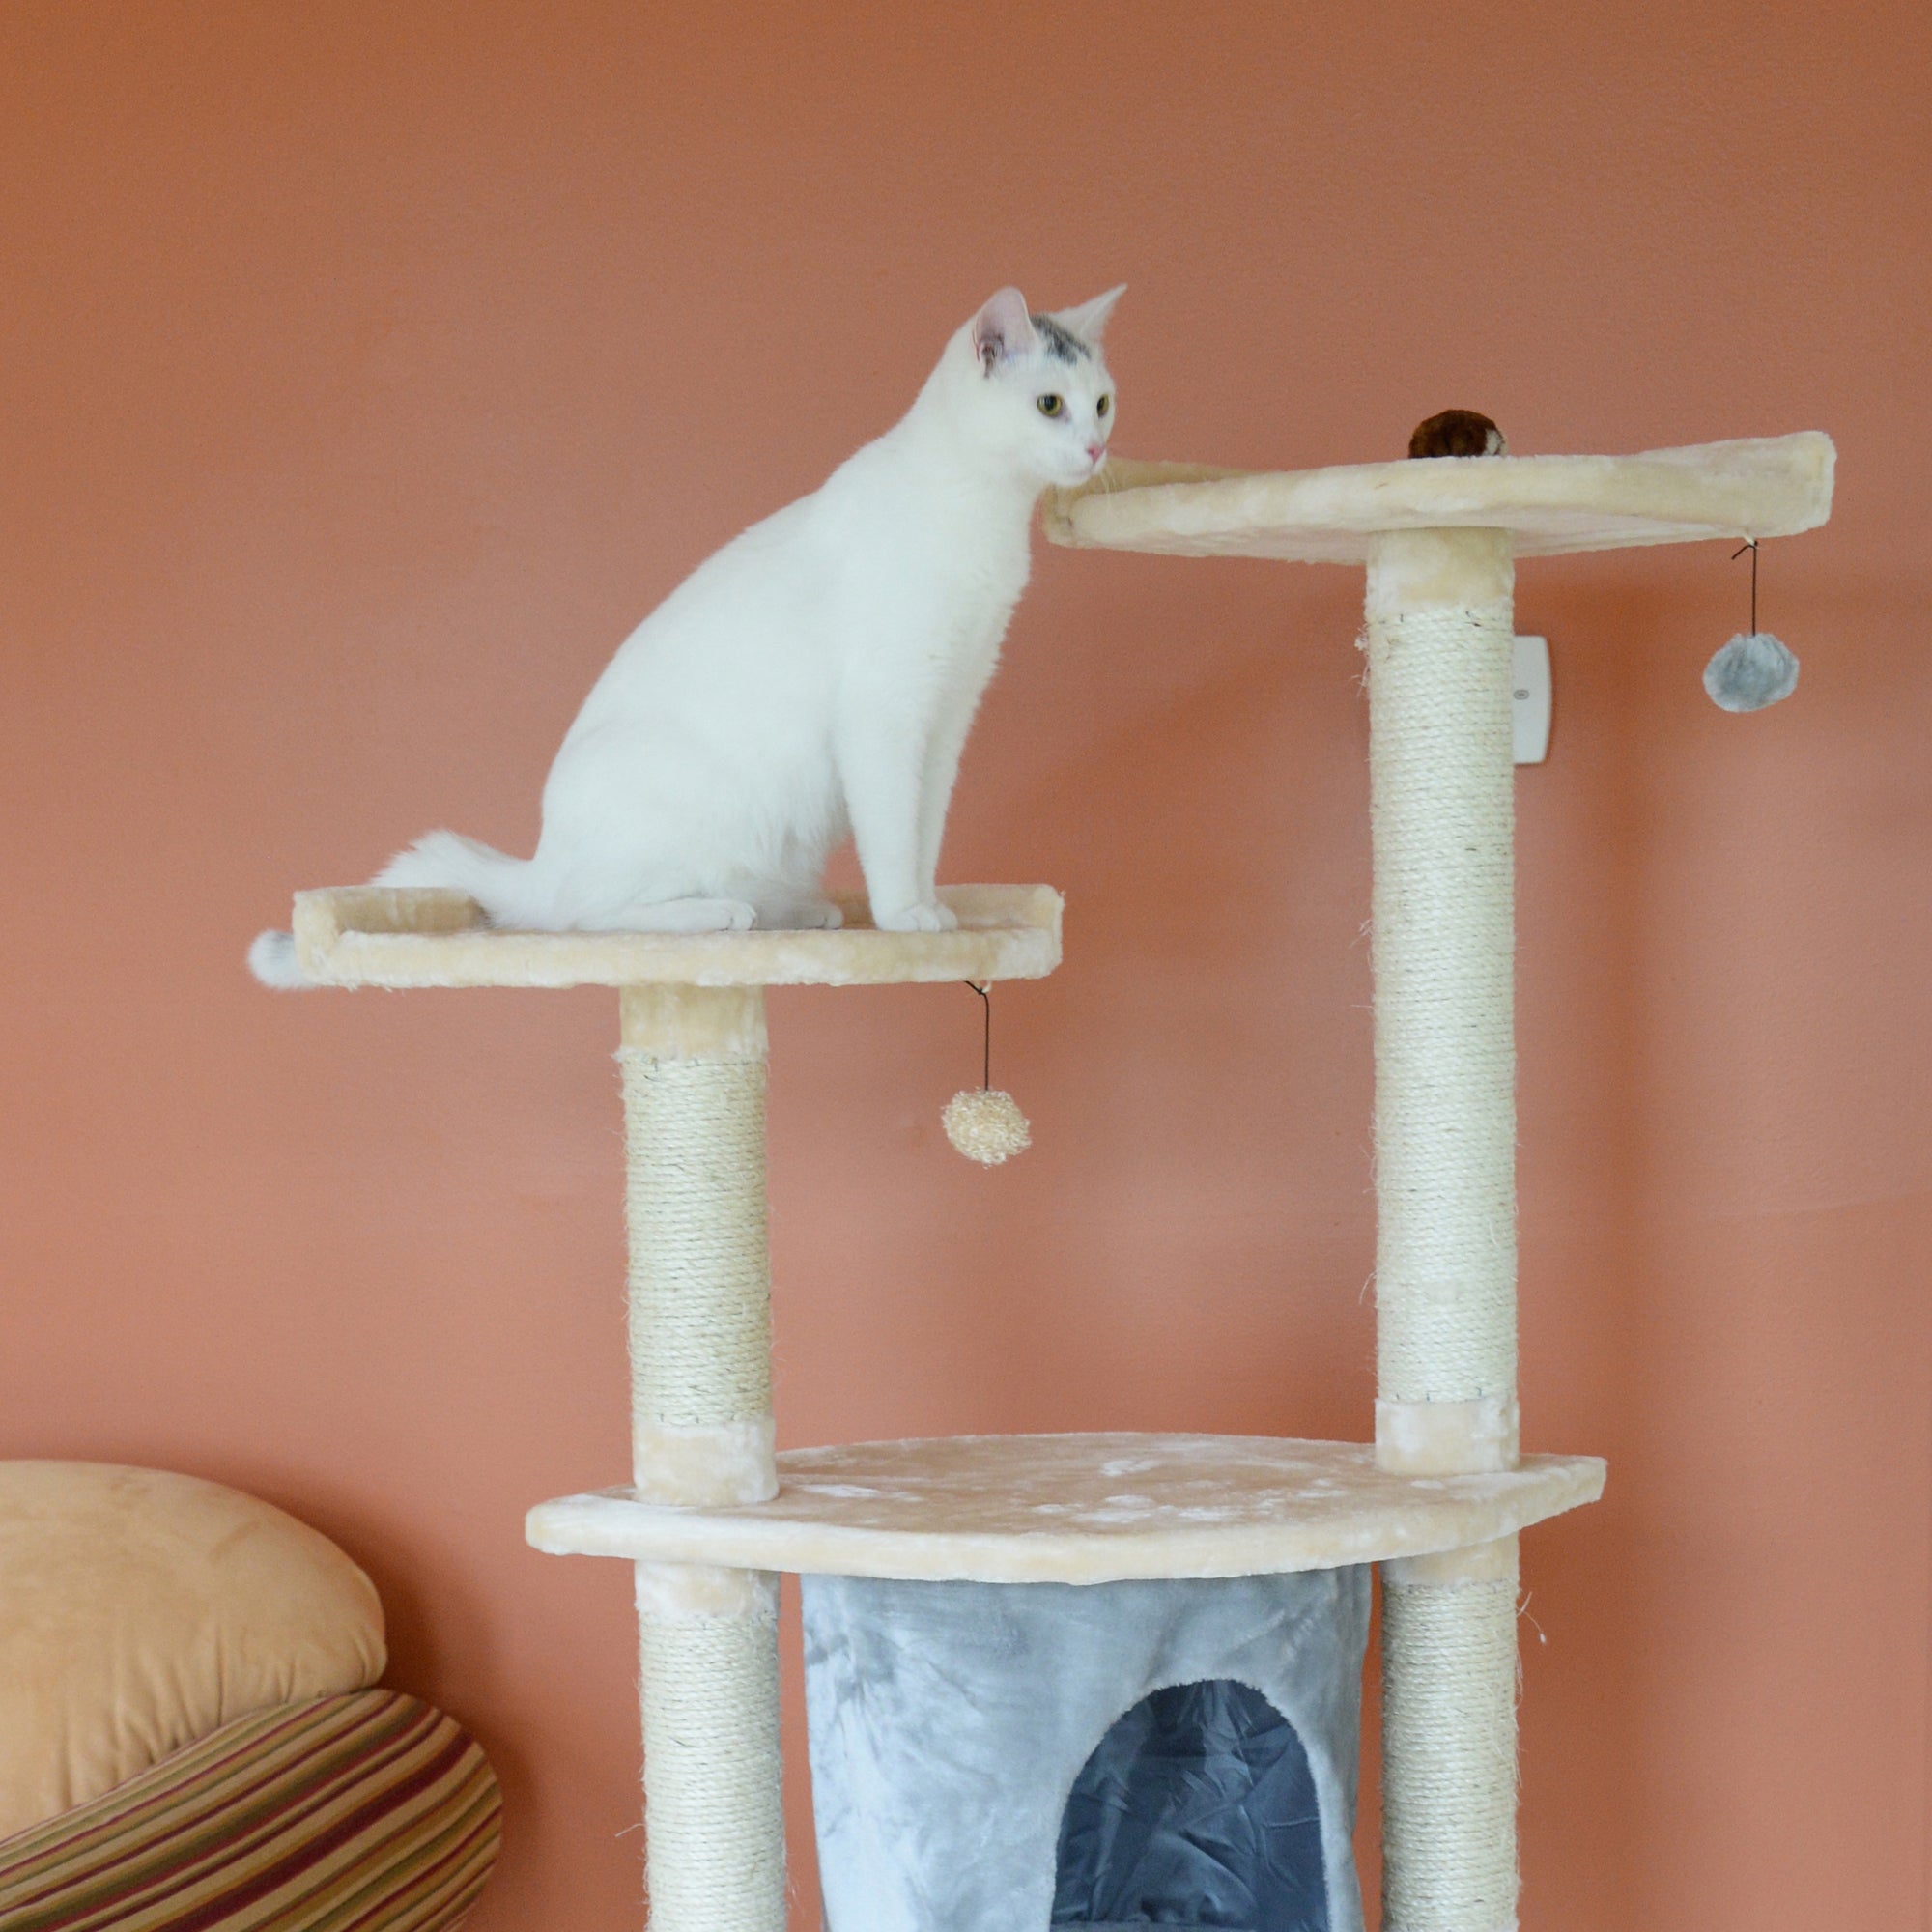 62-inch Faux Fur Cat Tree, Almond with Grey Condo by Armarkat